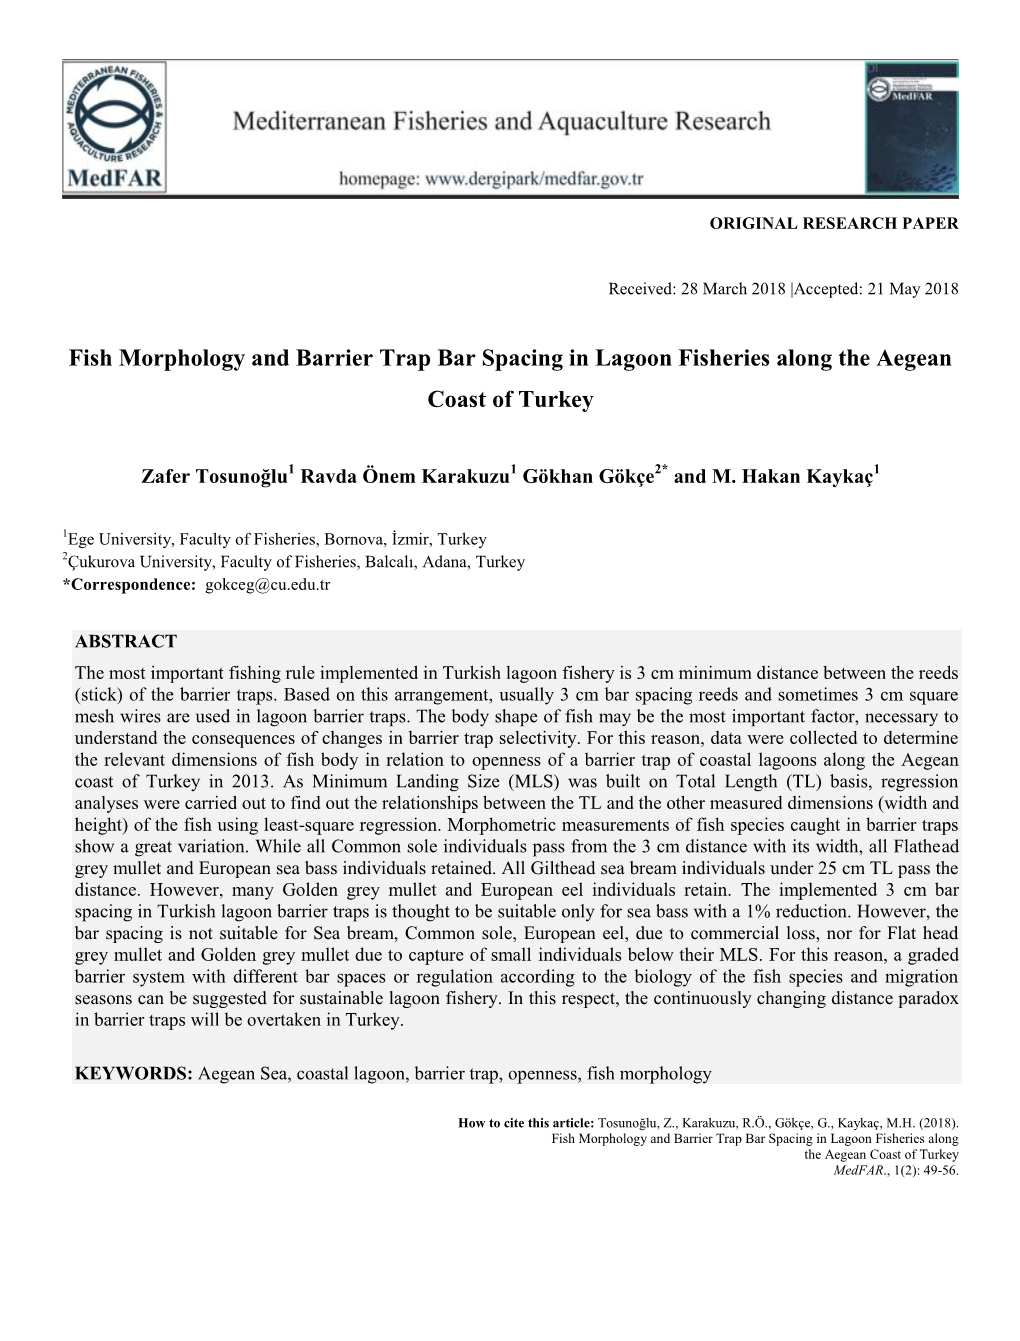 Fish Morphology and Barrier Trap Bar Spacing in Lagoon Fisheries Along the Aegean Coast of Turkey